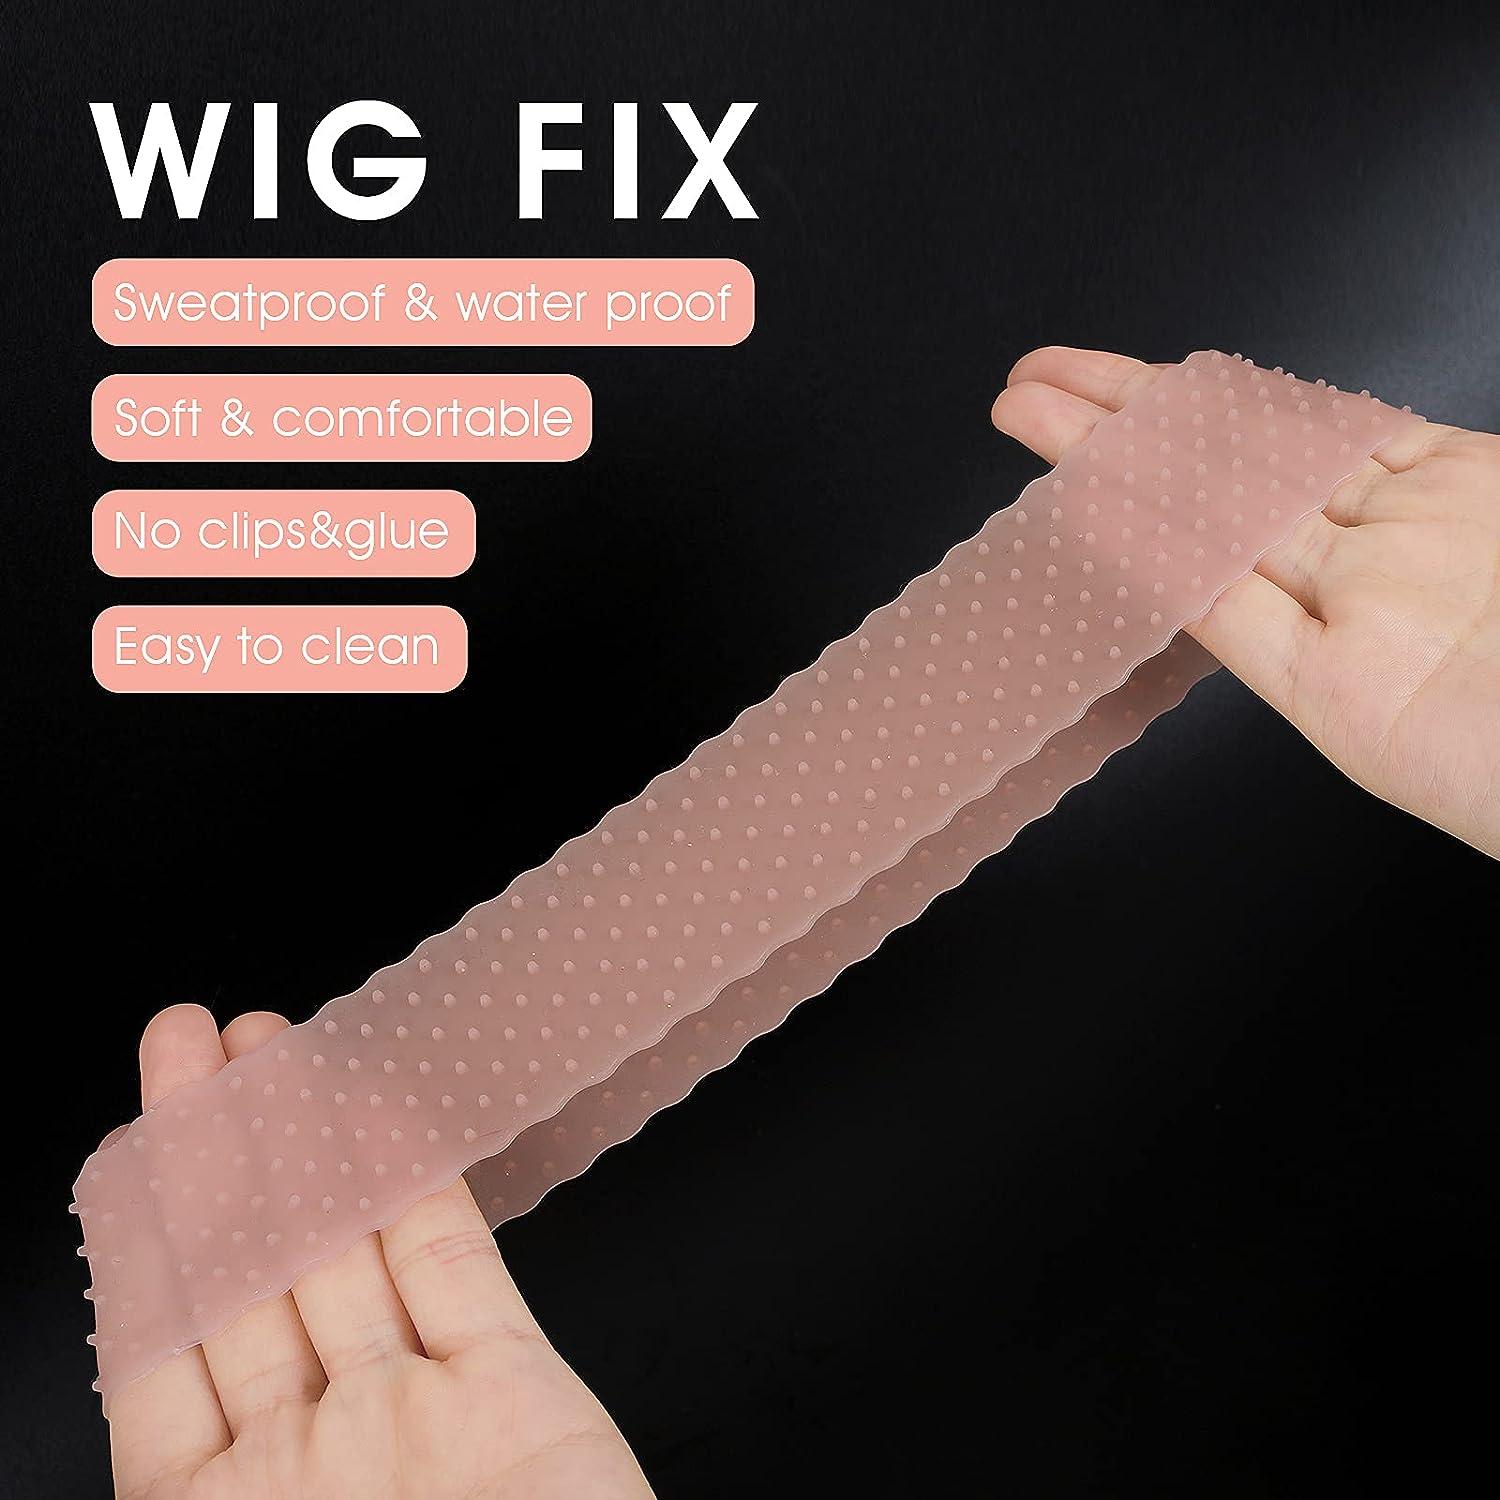  ZigZag Hair Non Slip Silicone Wig Grip Band Fix Transparent  Silicone Headband Drop-shaped Elastic Wig Band Lace Wig Grip Hair Band for  Wigs Sports Yoga 1Pc (M, Light Brown) 